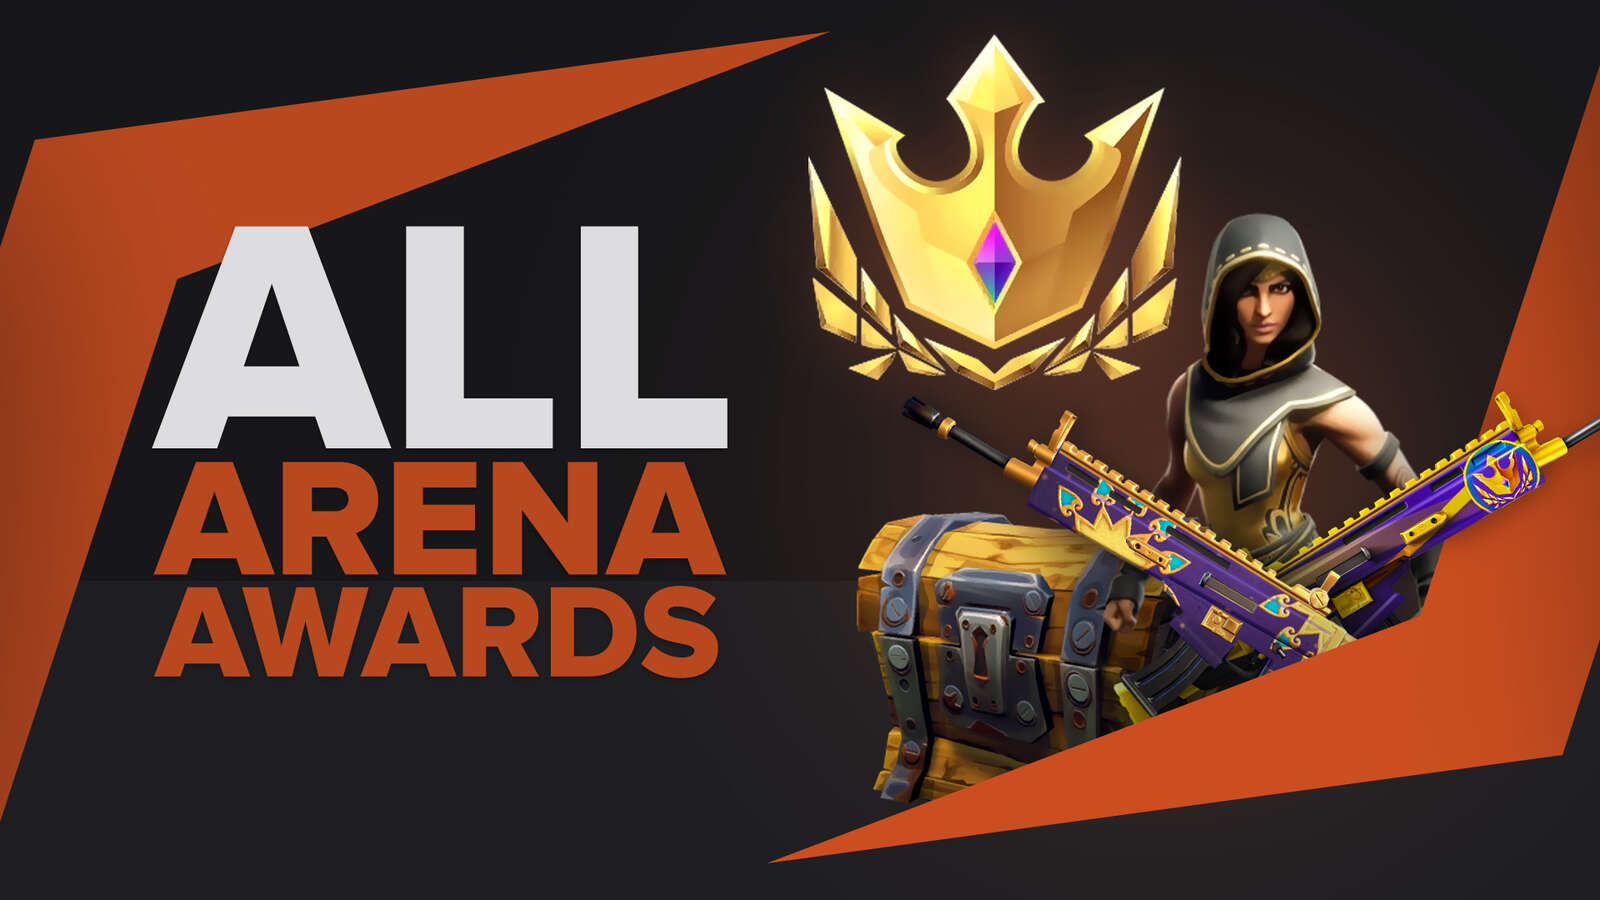 What are All the Arena Awards In Fortnite?